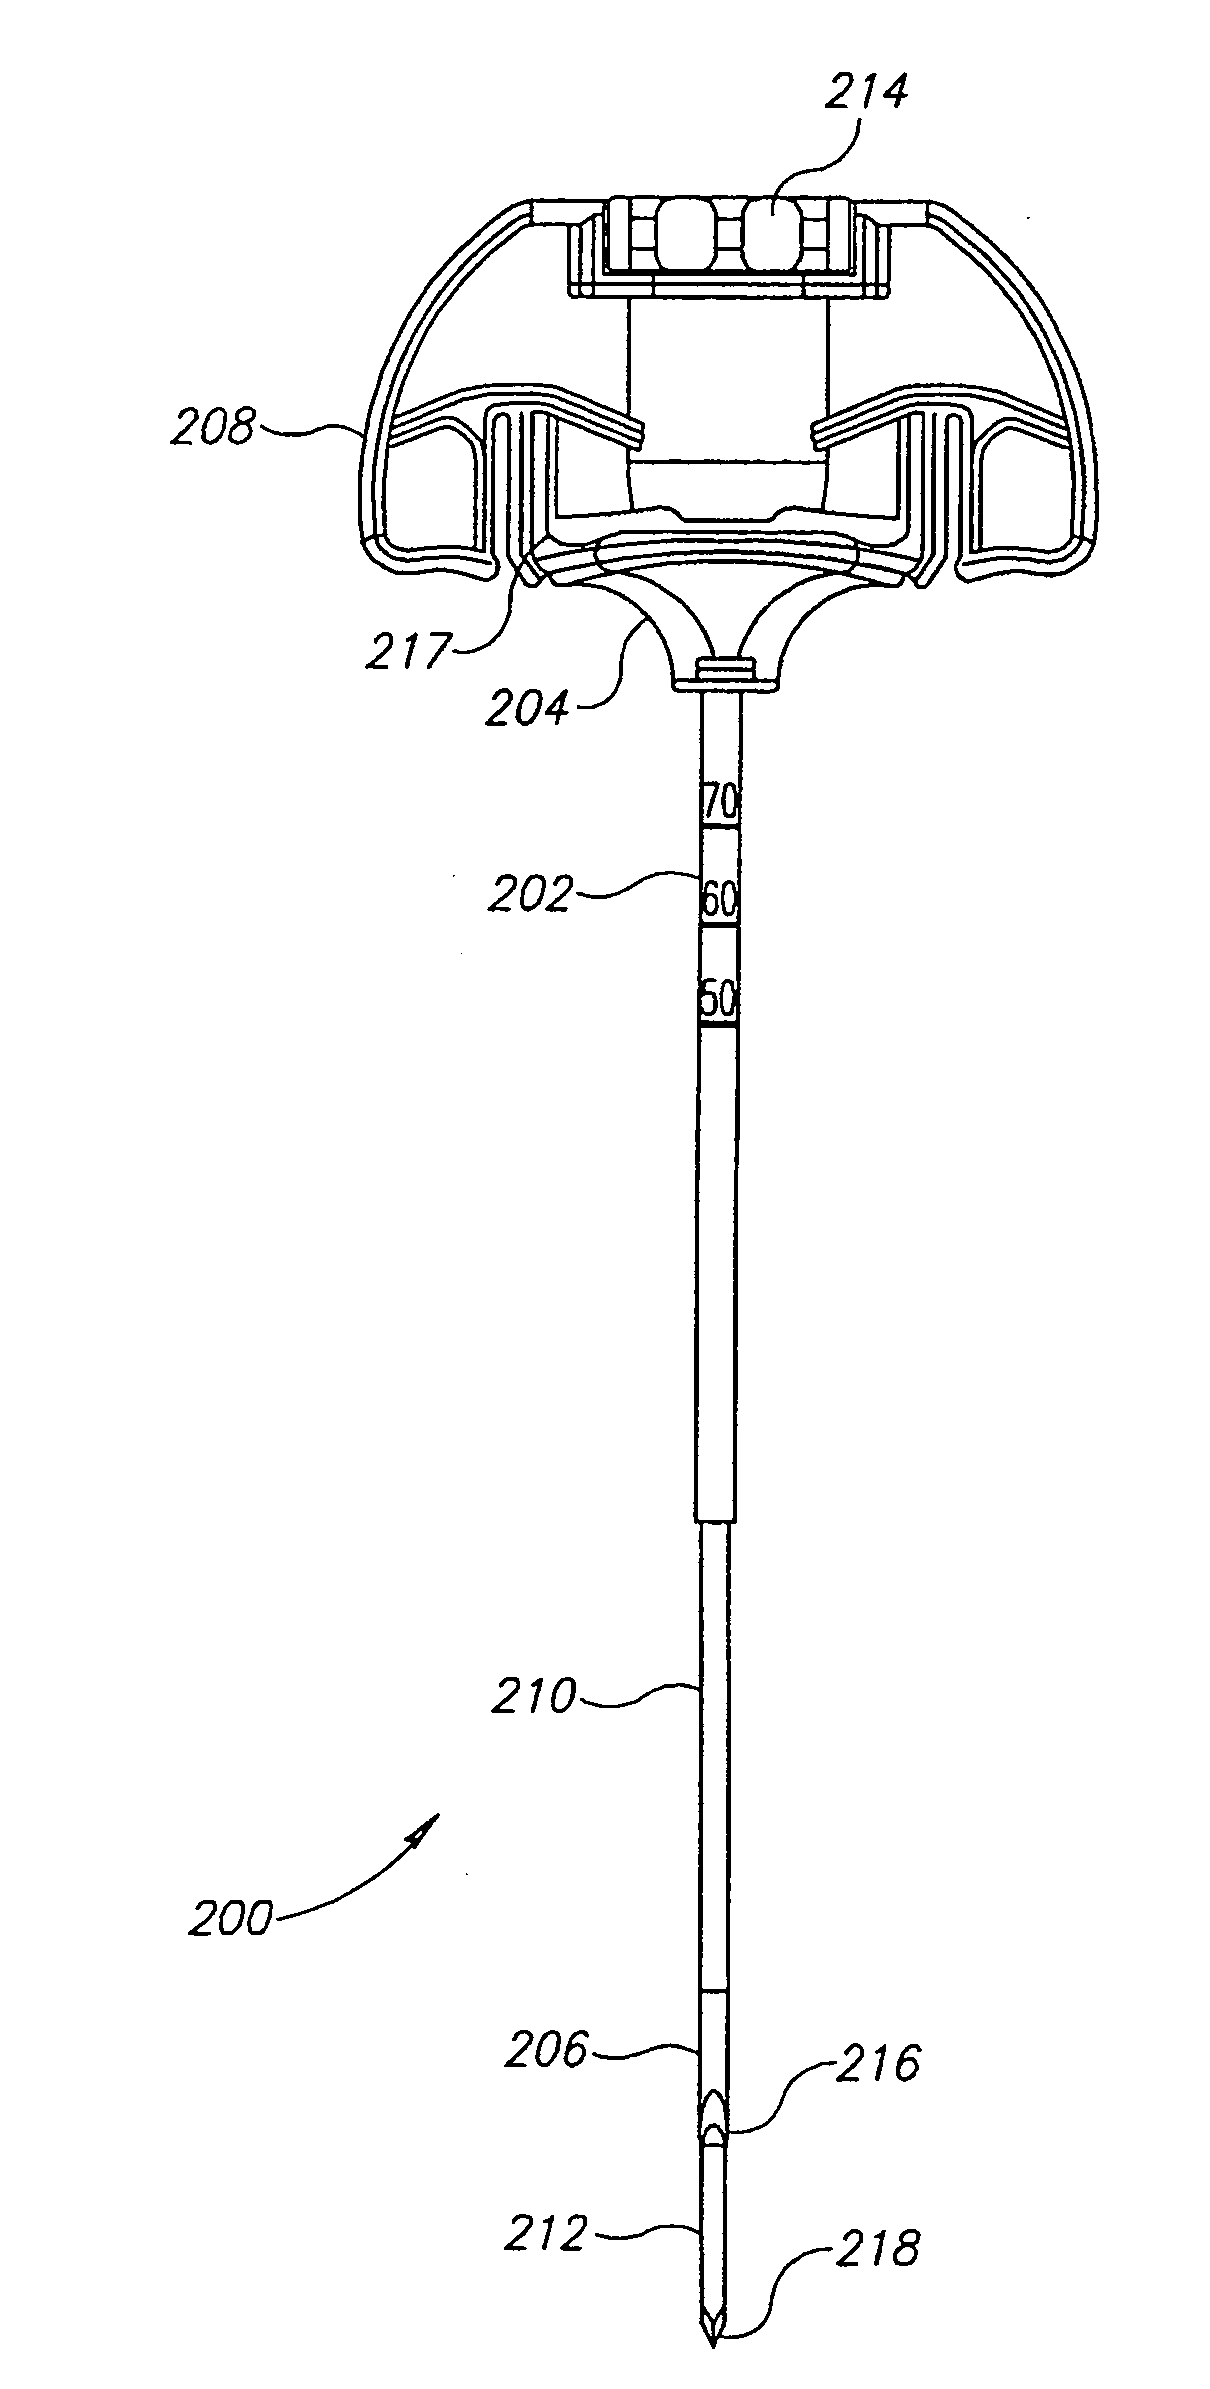 Methods, Materials and Apparatus for Treating Bone or Other Tissue